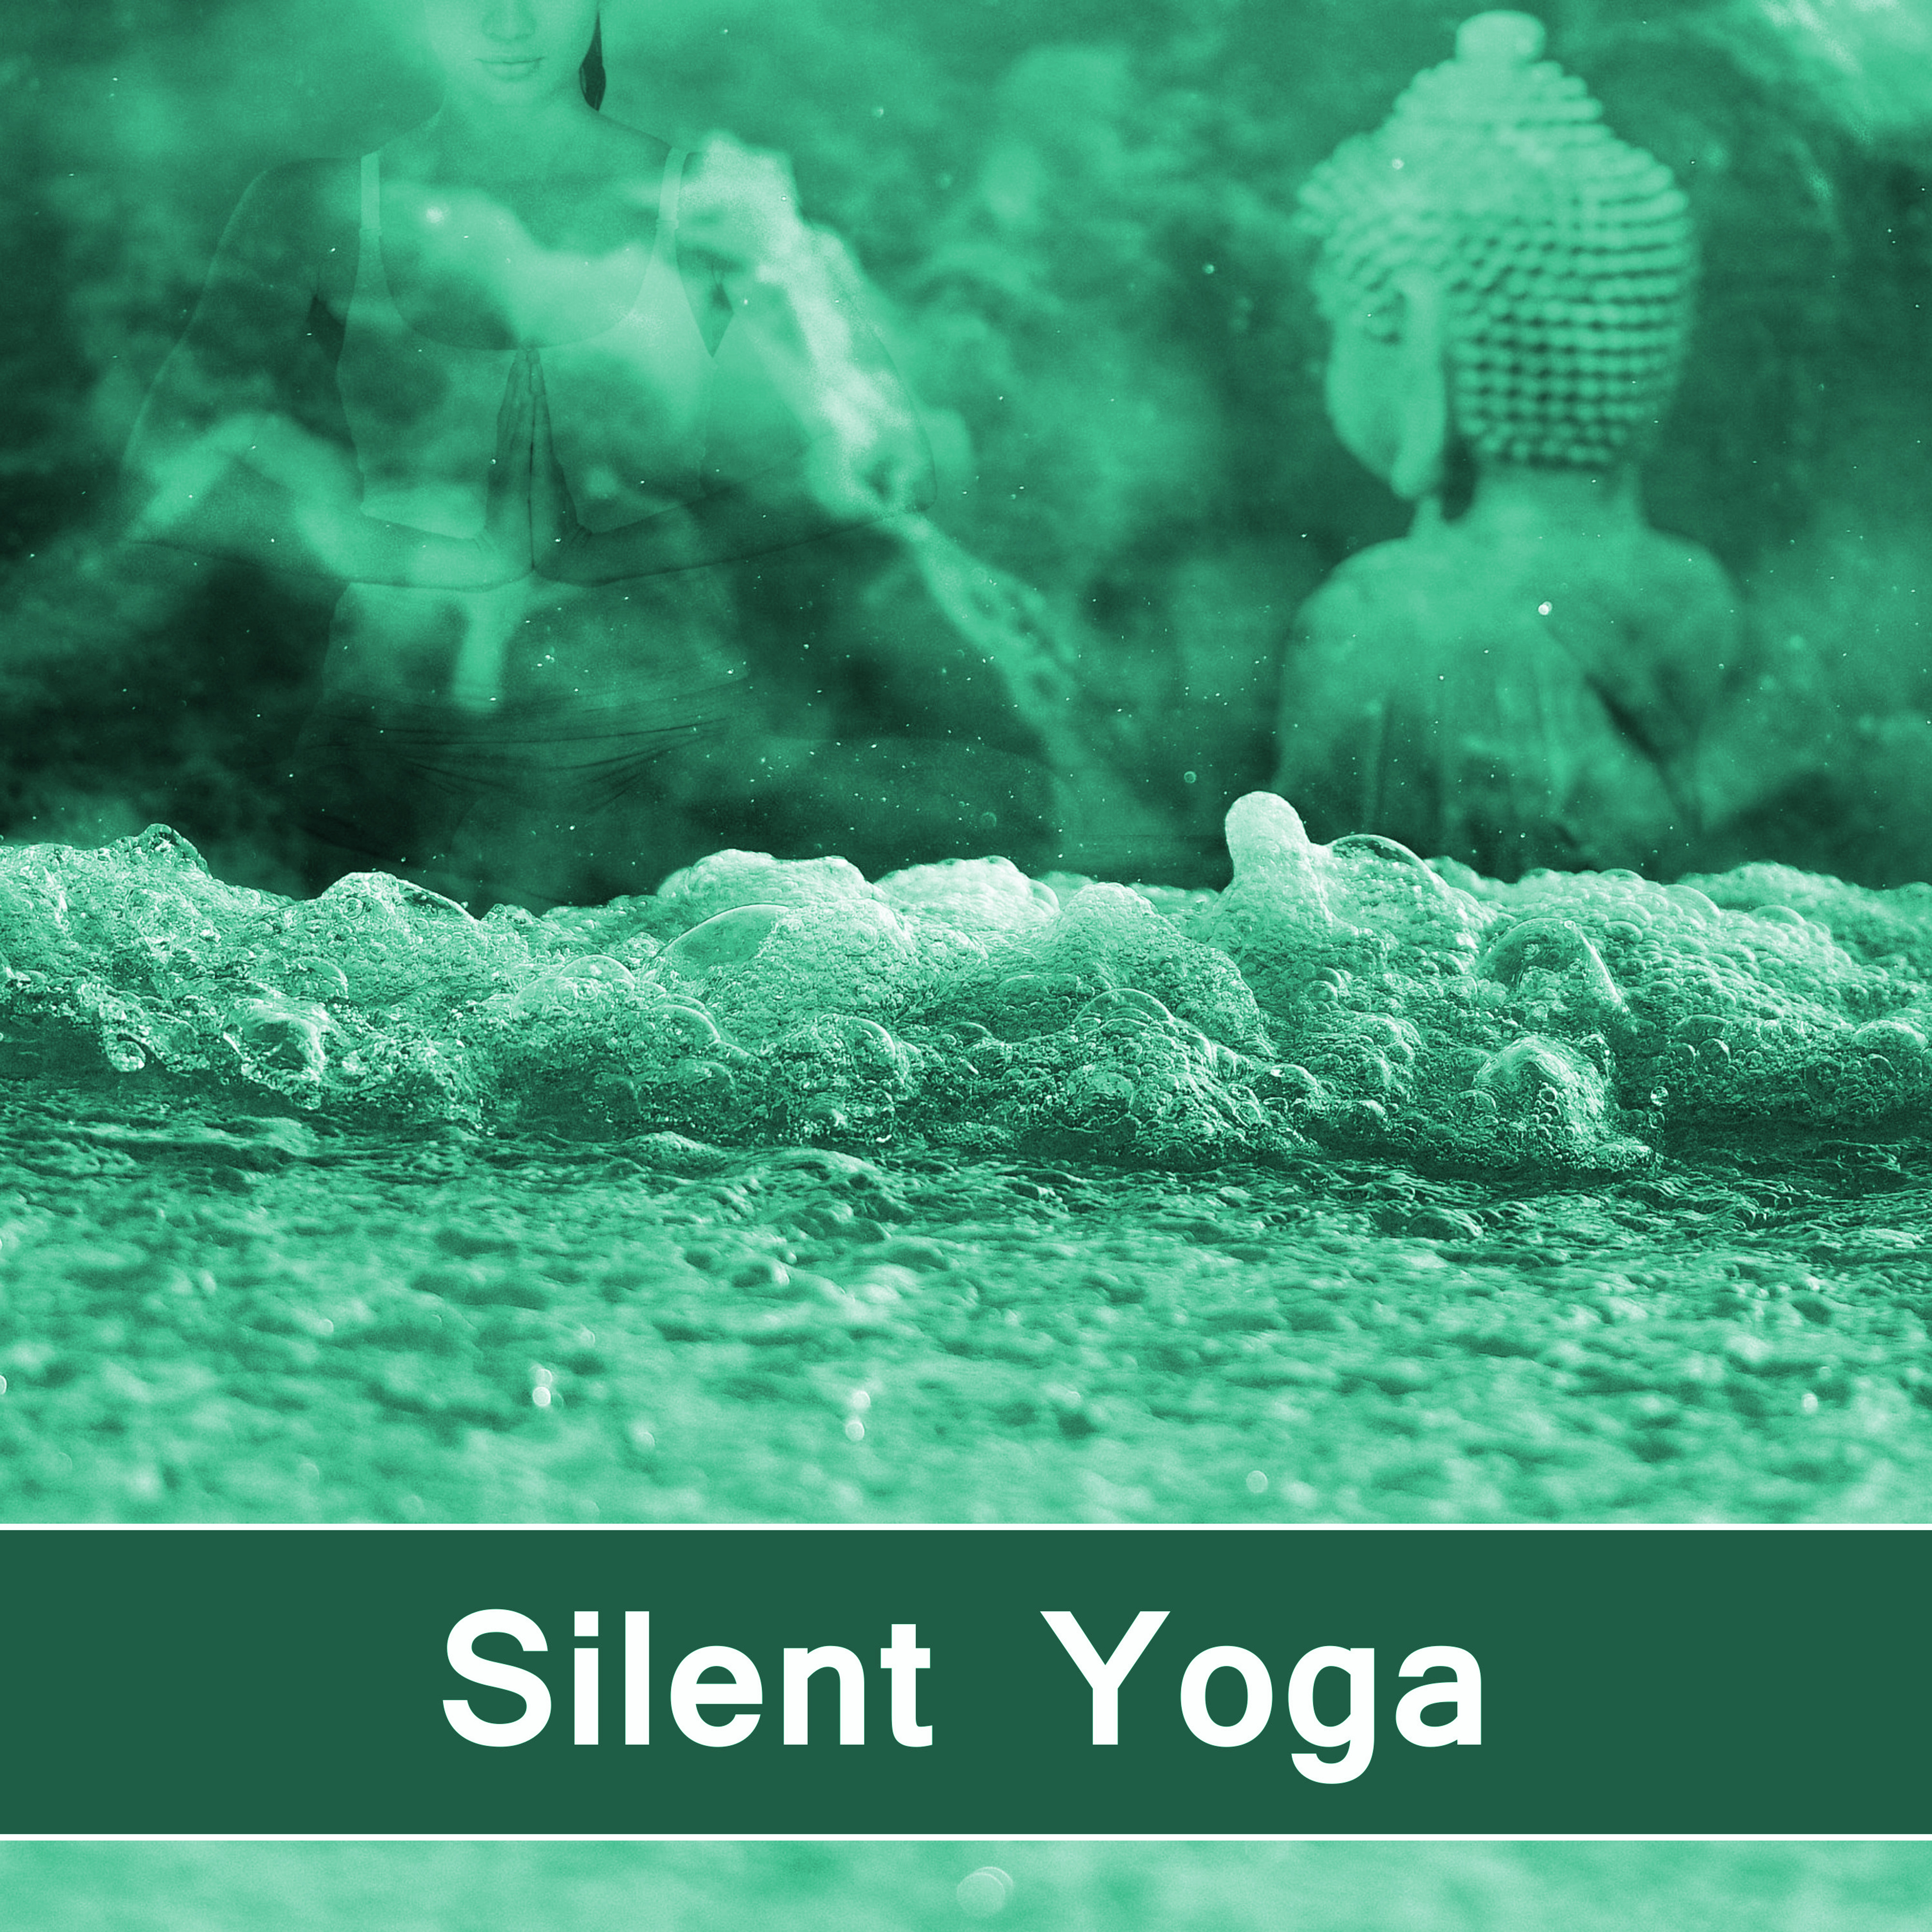 Silent Yoga  Meditation Music, Harmony  Concentration, Exercise Your Brain, Peaceful Mind, Calming Sounds